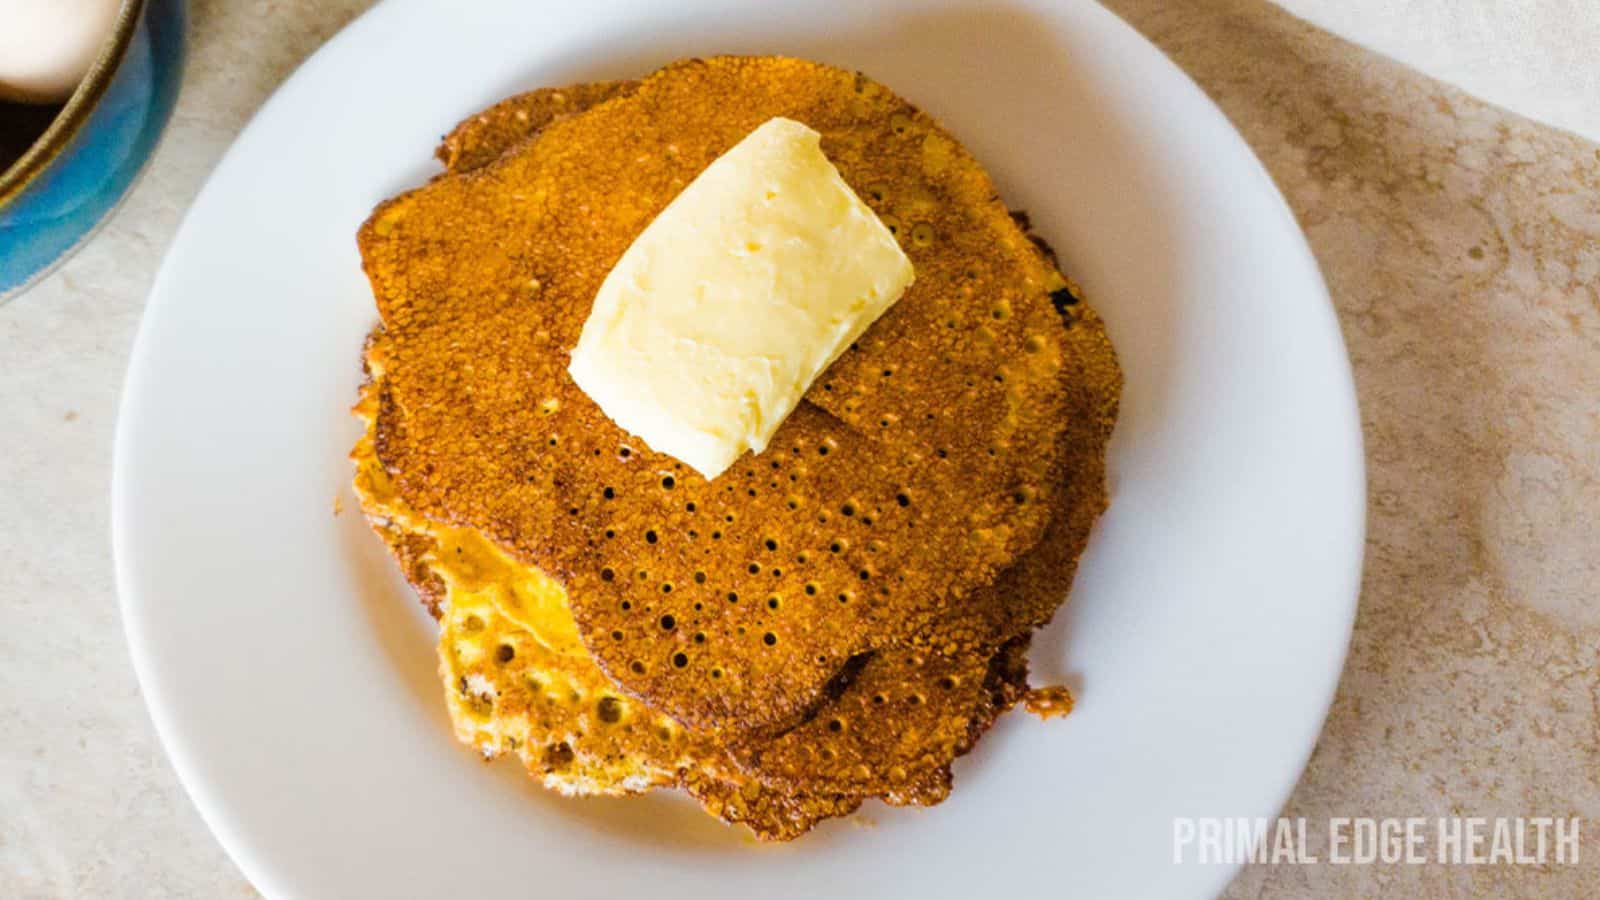 <p>Who says pancakes need to be complicated? These Cream Cheese Pancakes are low-carb and almost too easy to make. Perfect for lazy weekend mornings or quick weekday breakfasts, you’ll love their light, fluffy texture. No culinary expertise needed – just mix, pour, flip, and enjoy!<br><strong>Get the Recipe: </strong><a href="https://www.primaledgehealth.com/carnivore-pancakes/?utm_source=msn&utm_medium=page&utm_campaign=msn">Cream Cheese Pancakes</a></p>